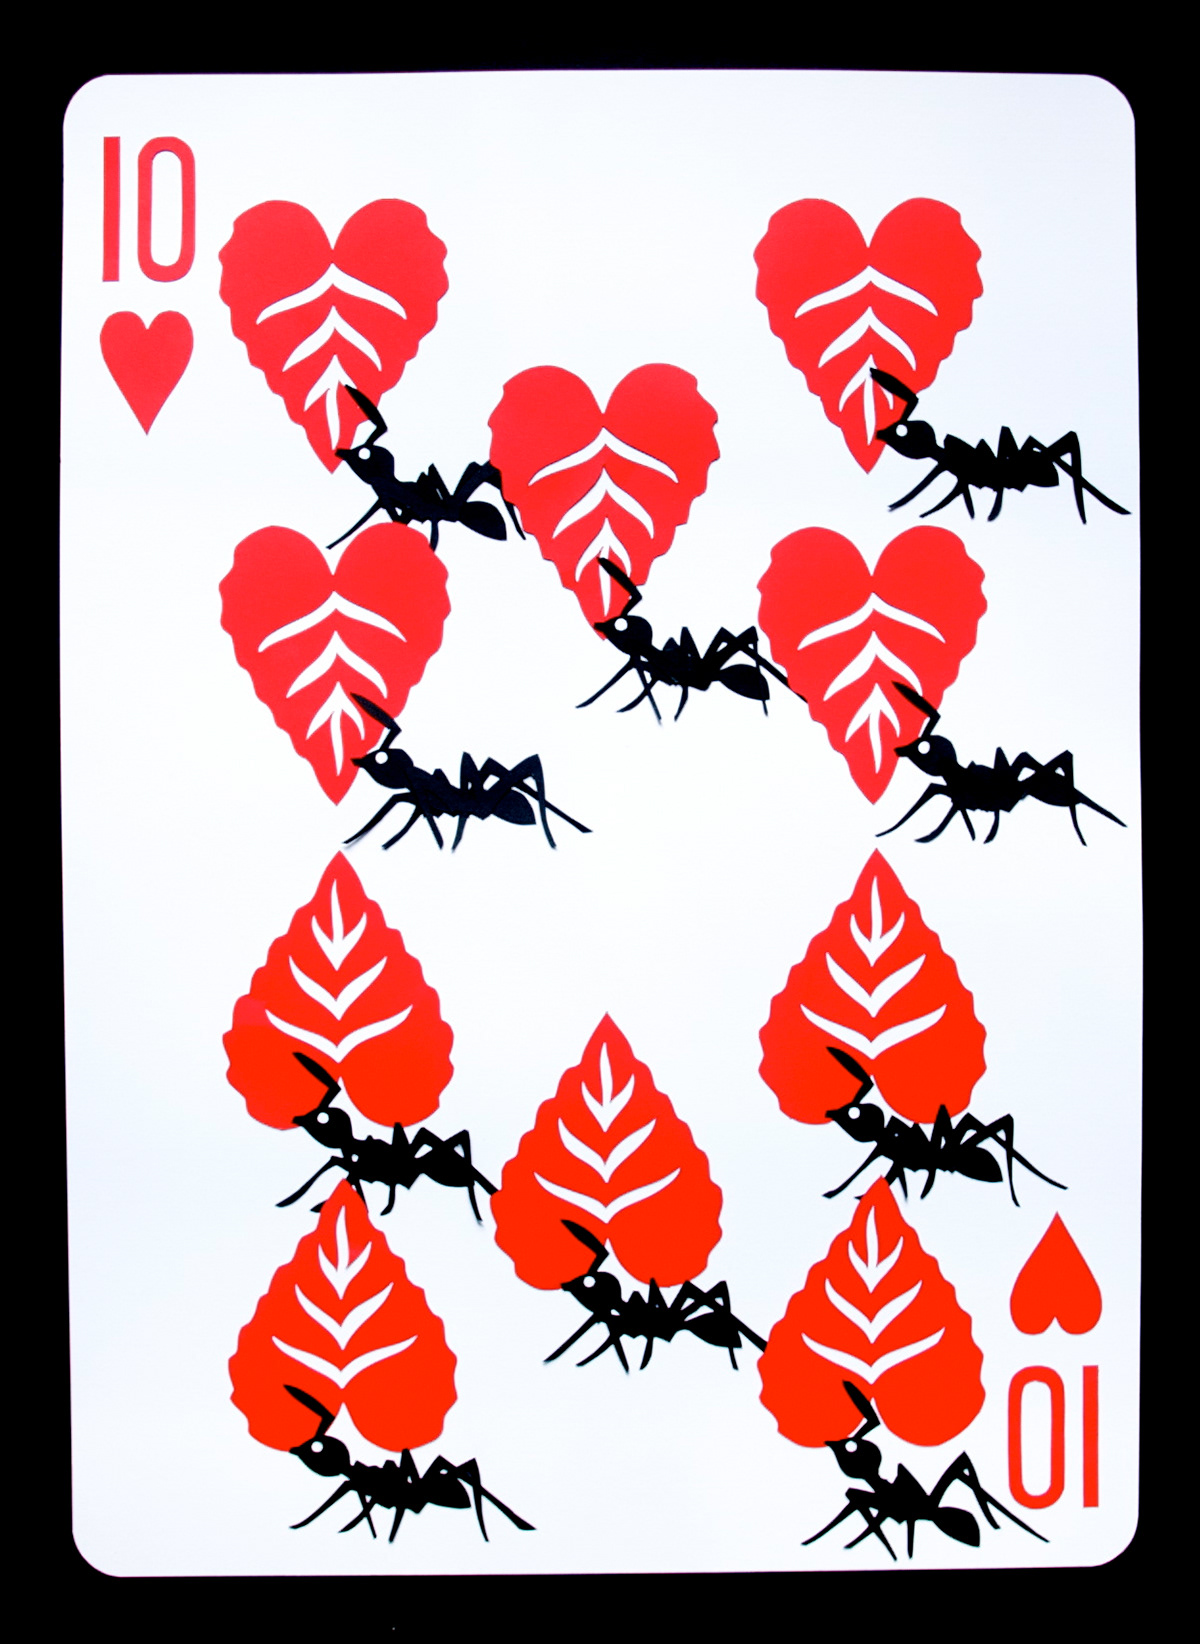 Playing Cards poker cards transformation cards deck of cards paper papercutting Paper cutting spades hearts clubs diamonds ace jack queen king cards game cardistry PIPS